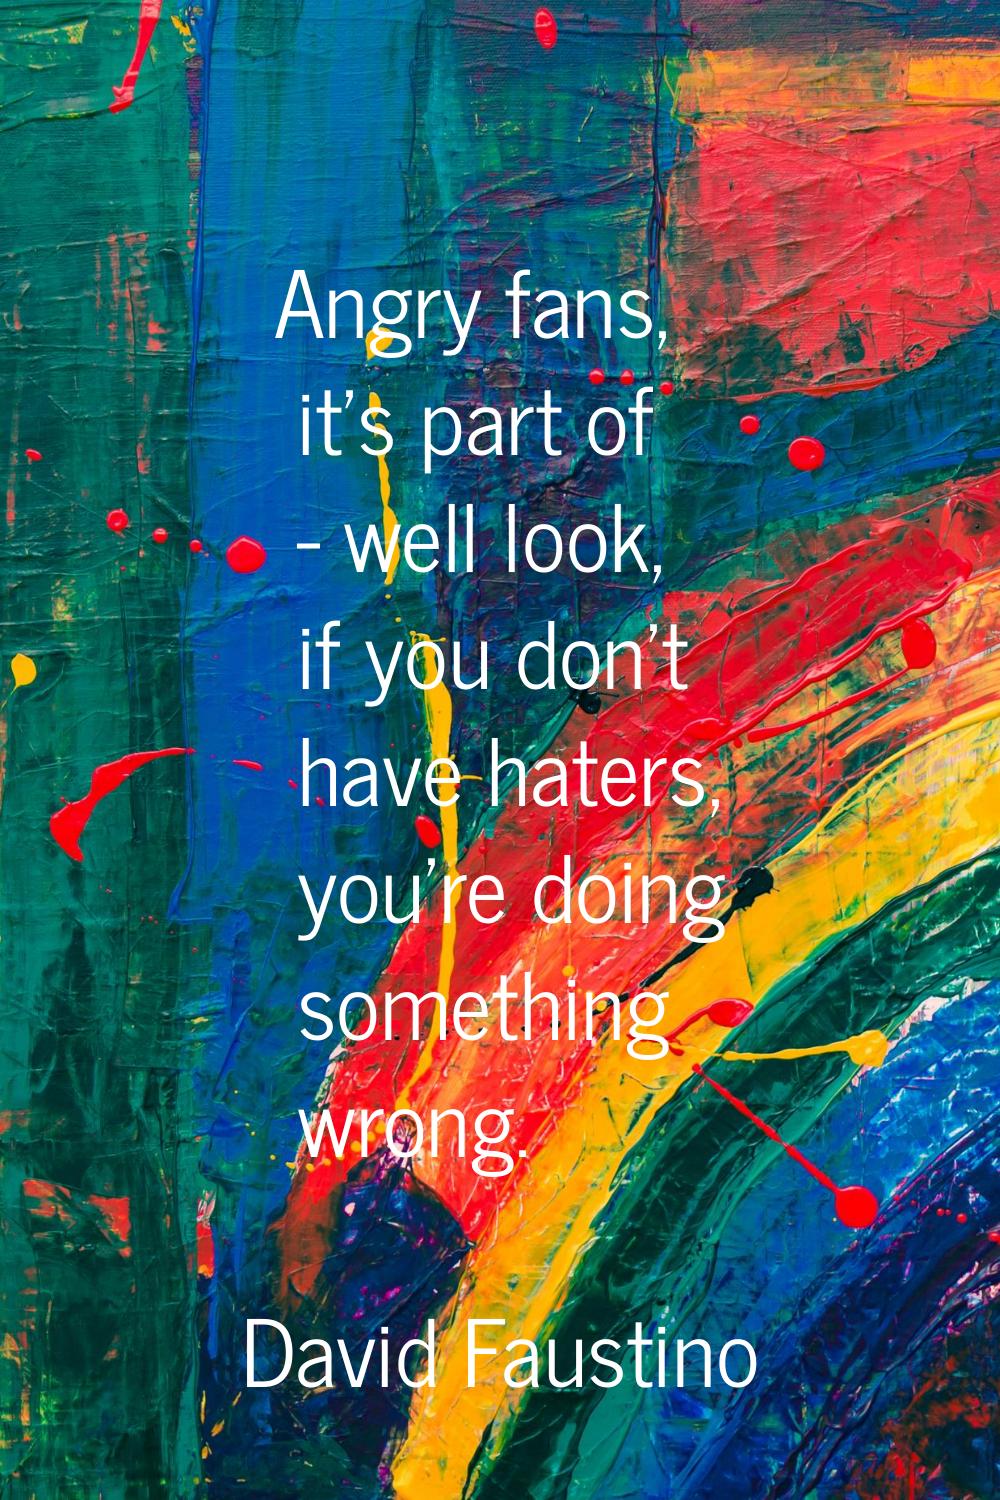 Angry fans, it's part of - well look, if you don't have haters, you're doing something wrong.